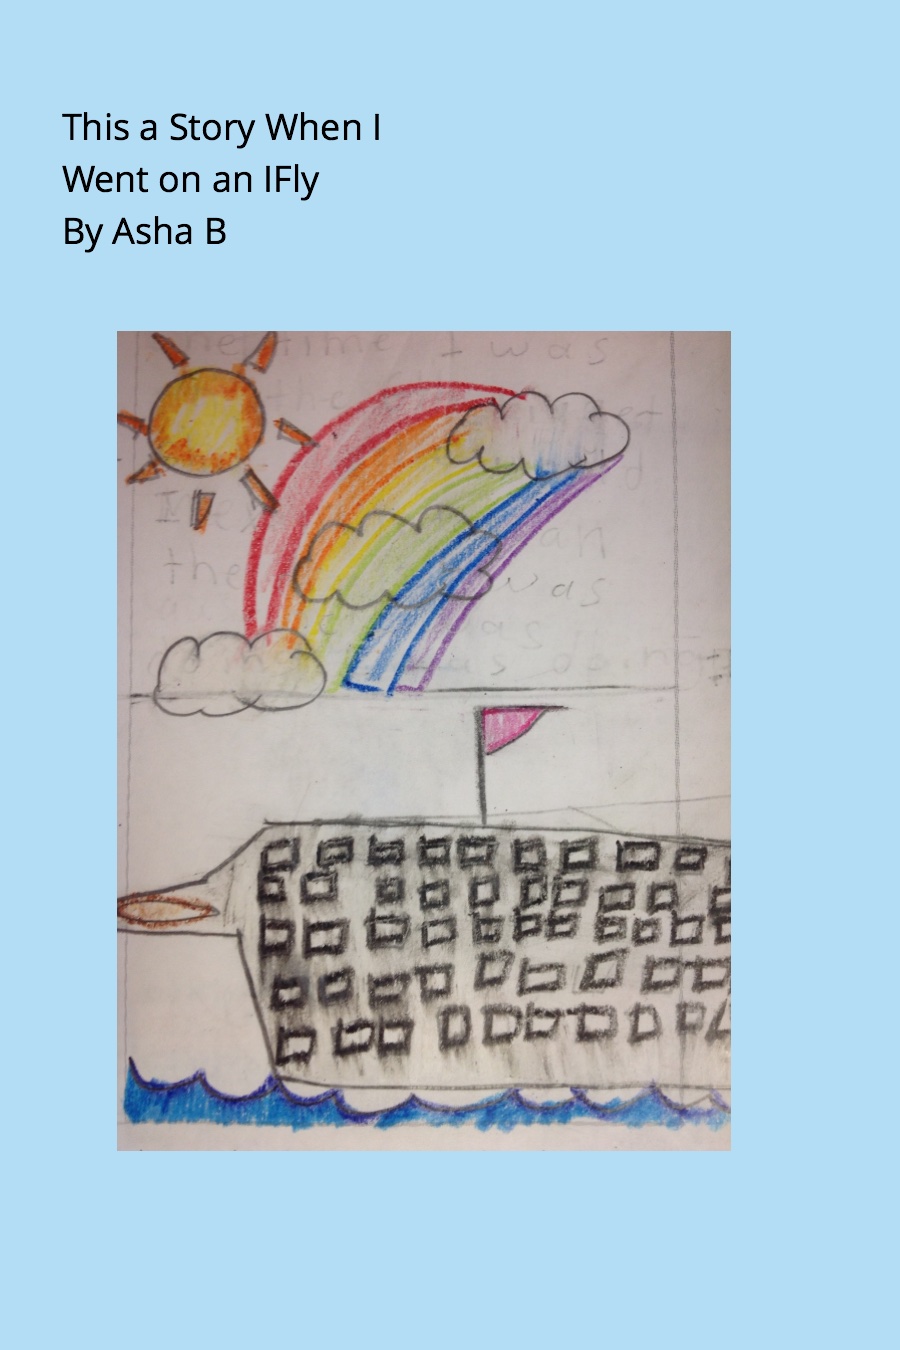 This a Story When I Went on an IFly by Asha B